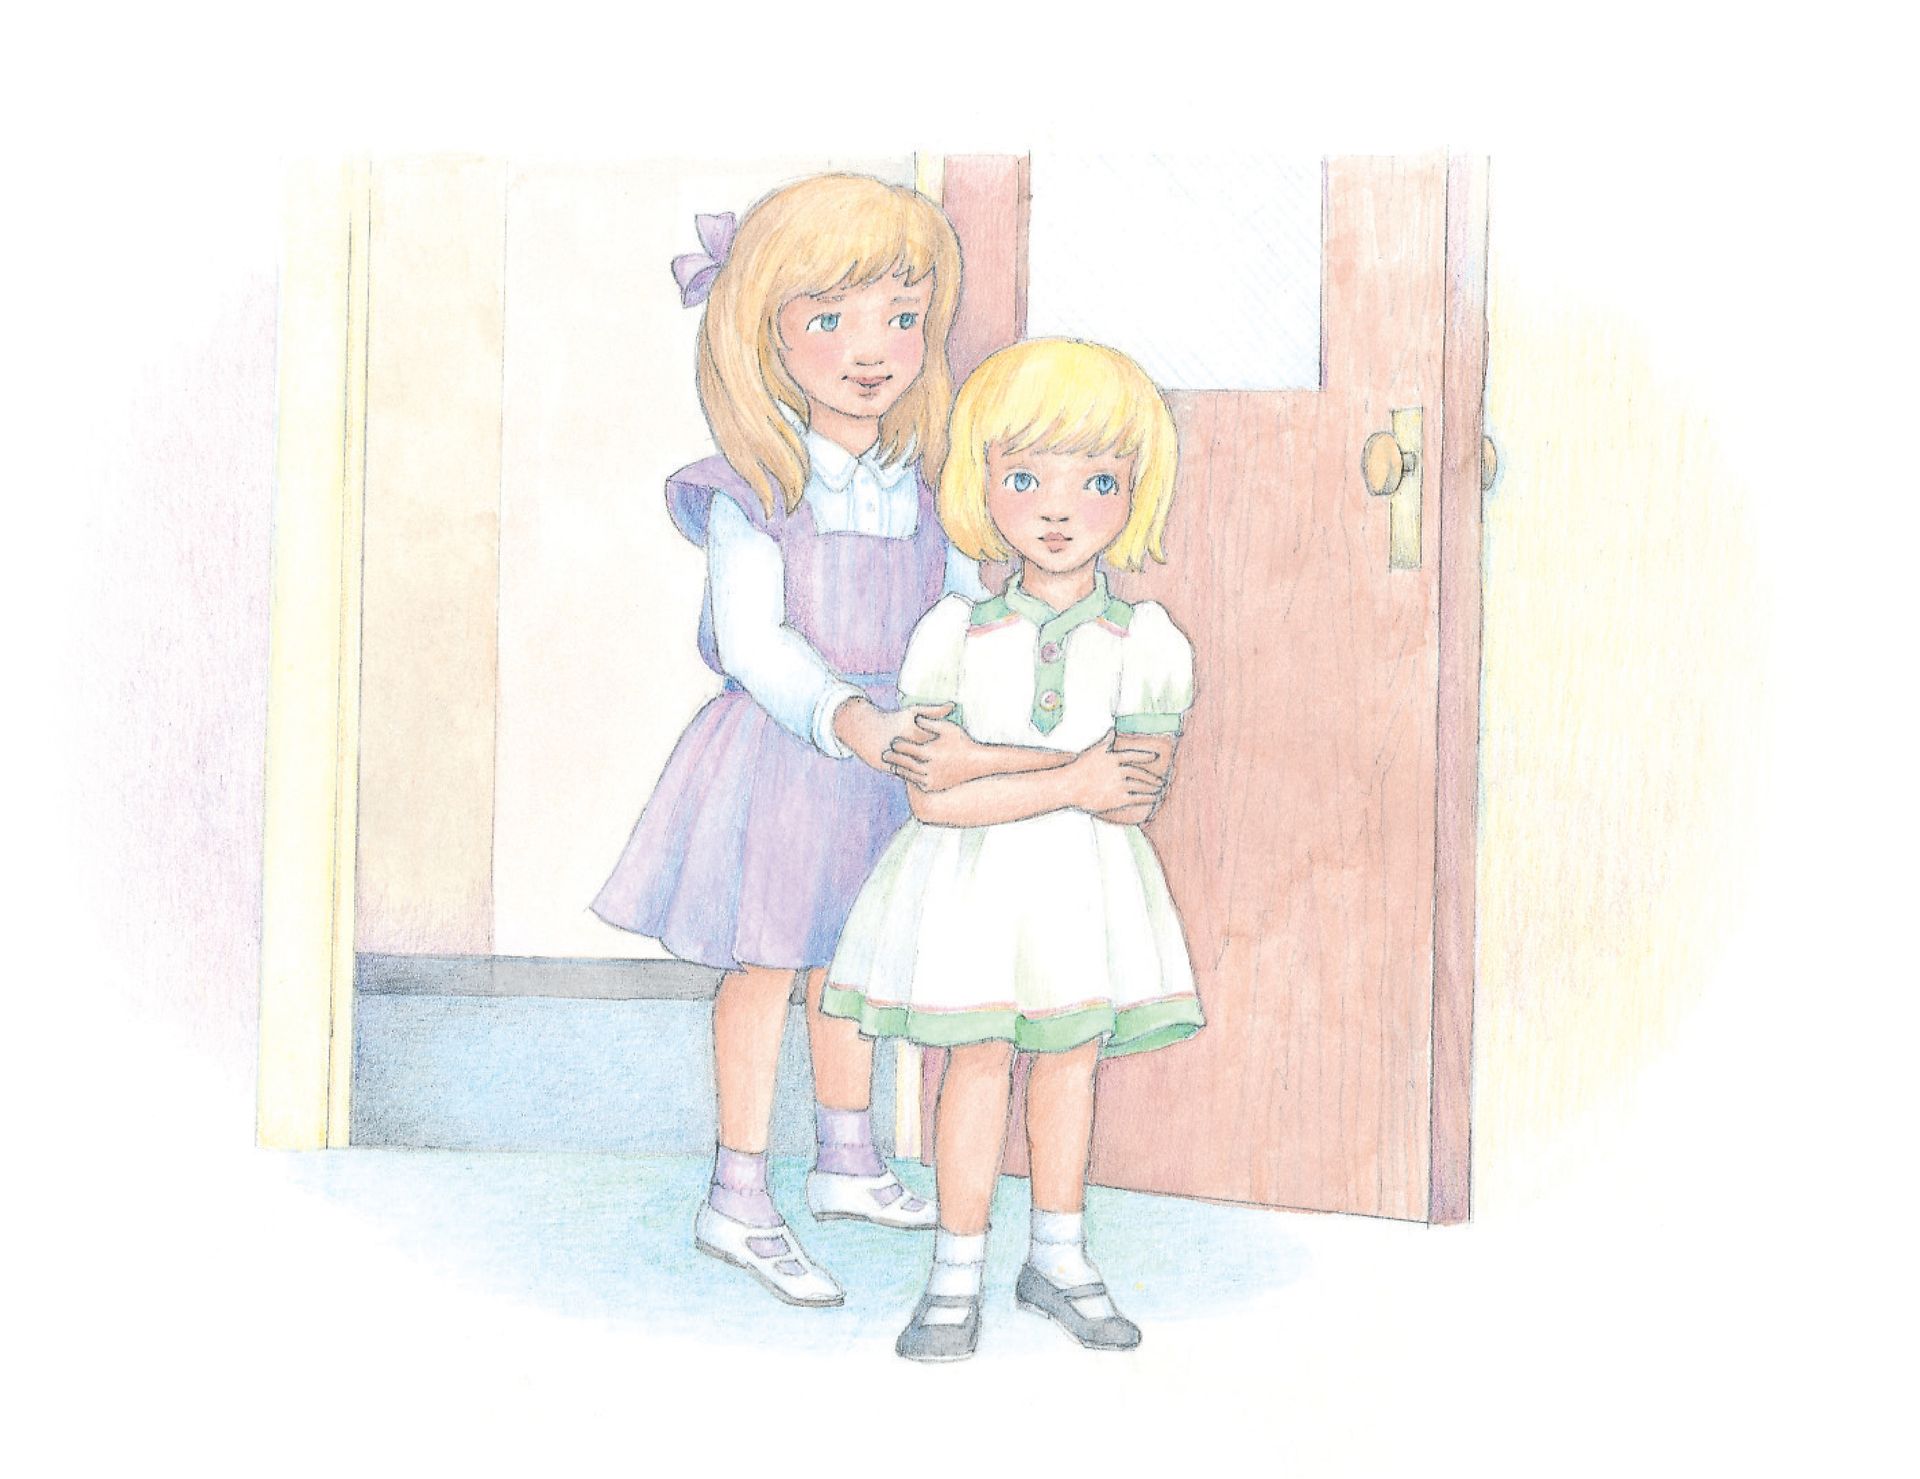 Two small girls walk through a door into a Primary meeting. From the Children’s Songbook, page 18, “I Need My Heavenly Father”; watercolor illustration by Phyllis Luch.